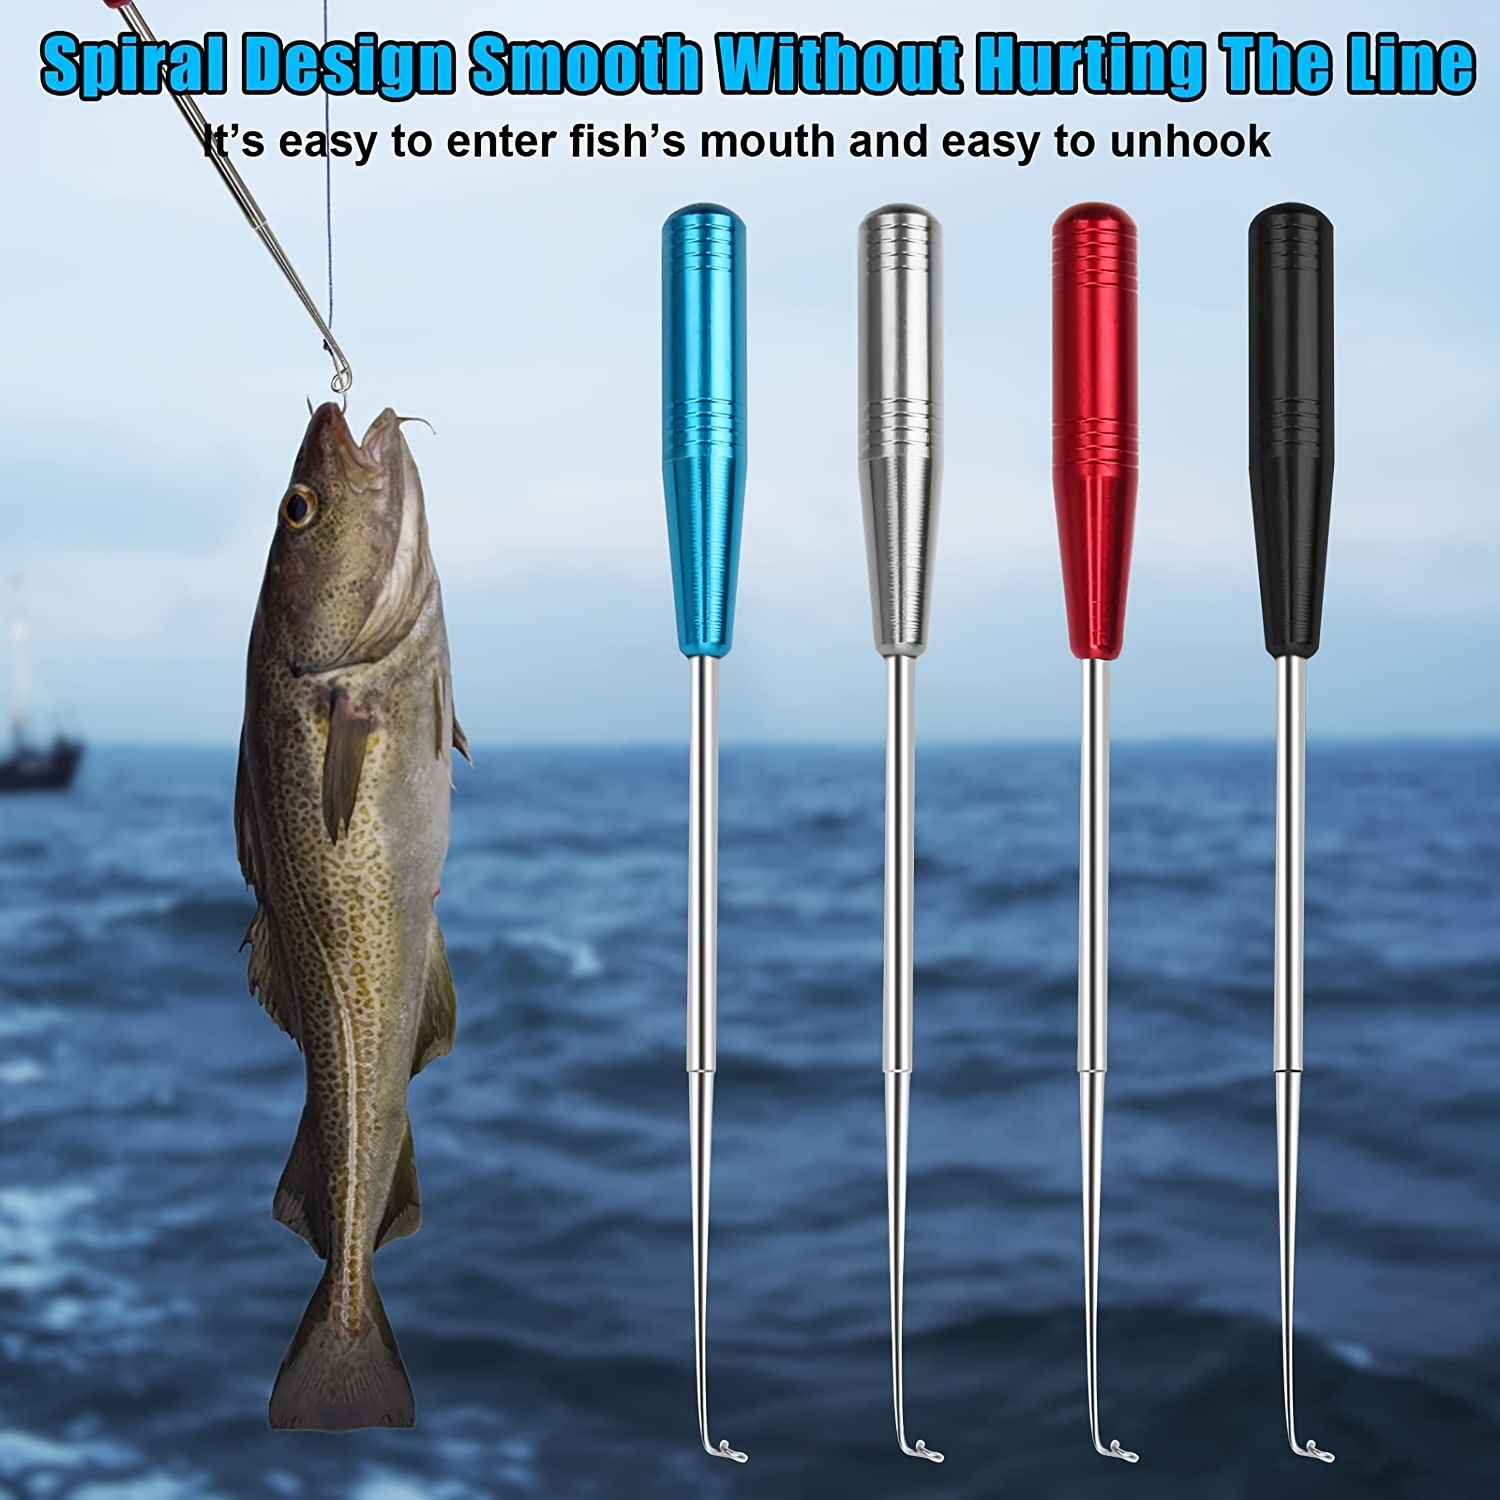 2pcs New Fishing Hook Quick Removal Device,Fish Hook Remover Tool